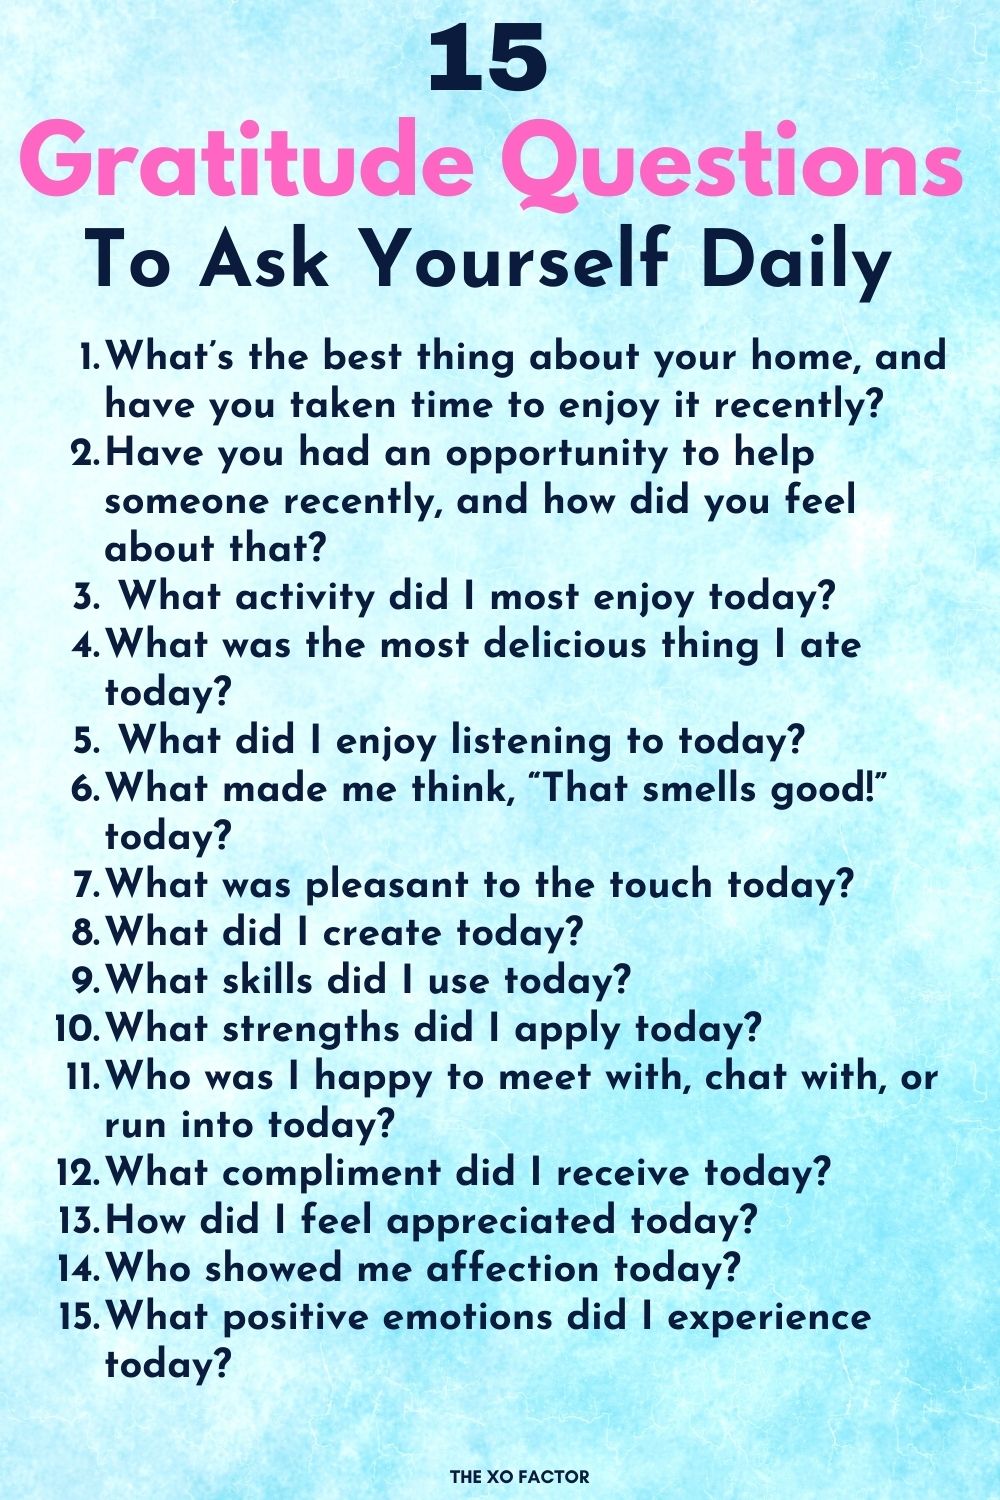 Gratitude questions to ask yourself daily